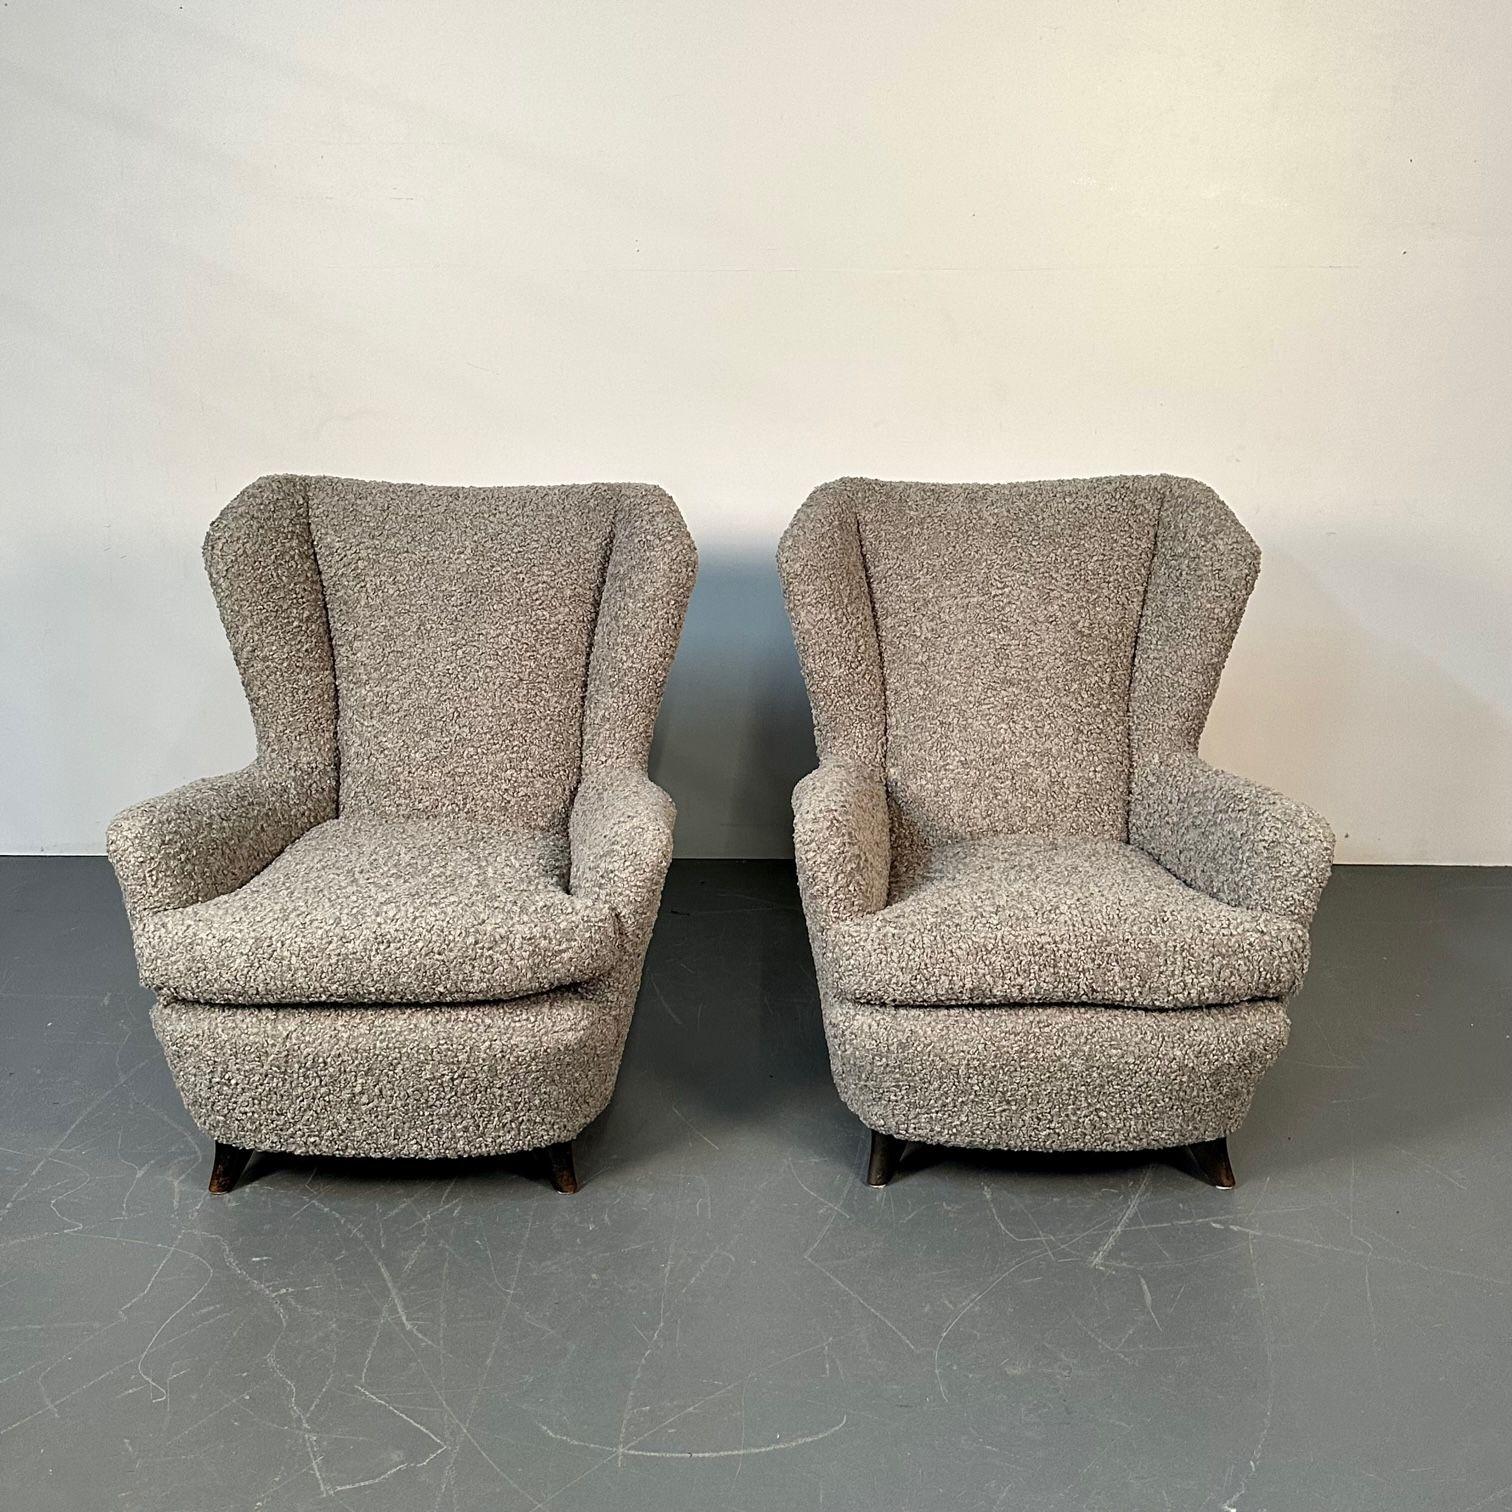 Mid-20th Century Pair Italian Mid-Century Modern Wingback Lounge Chairs, Zanuso Style Grey Boucle For Sale